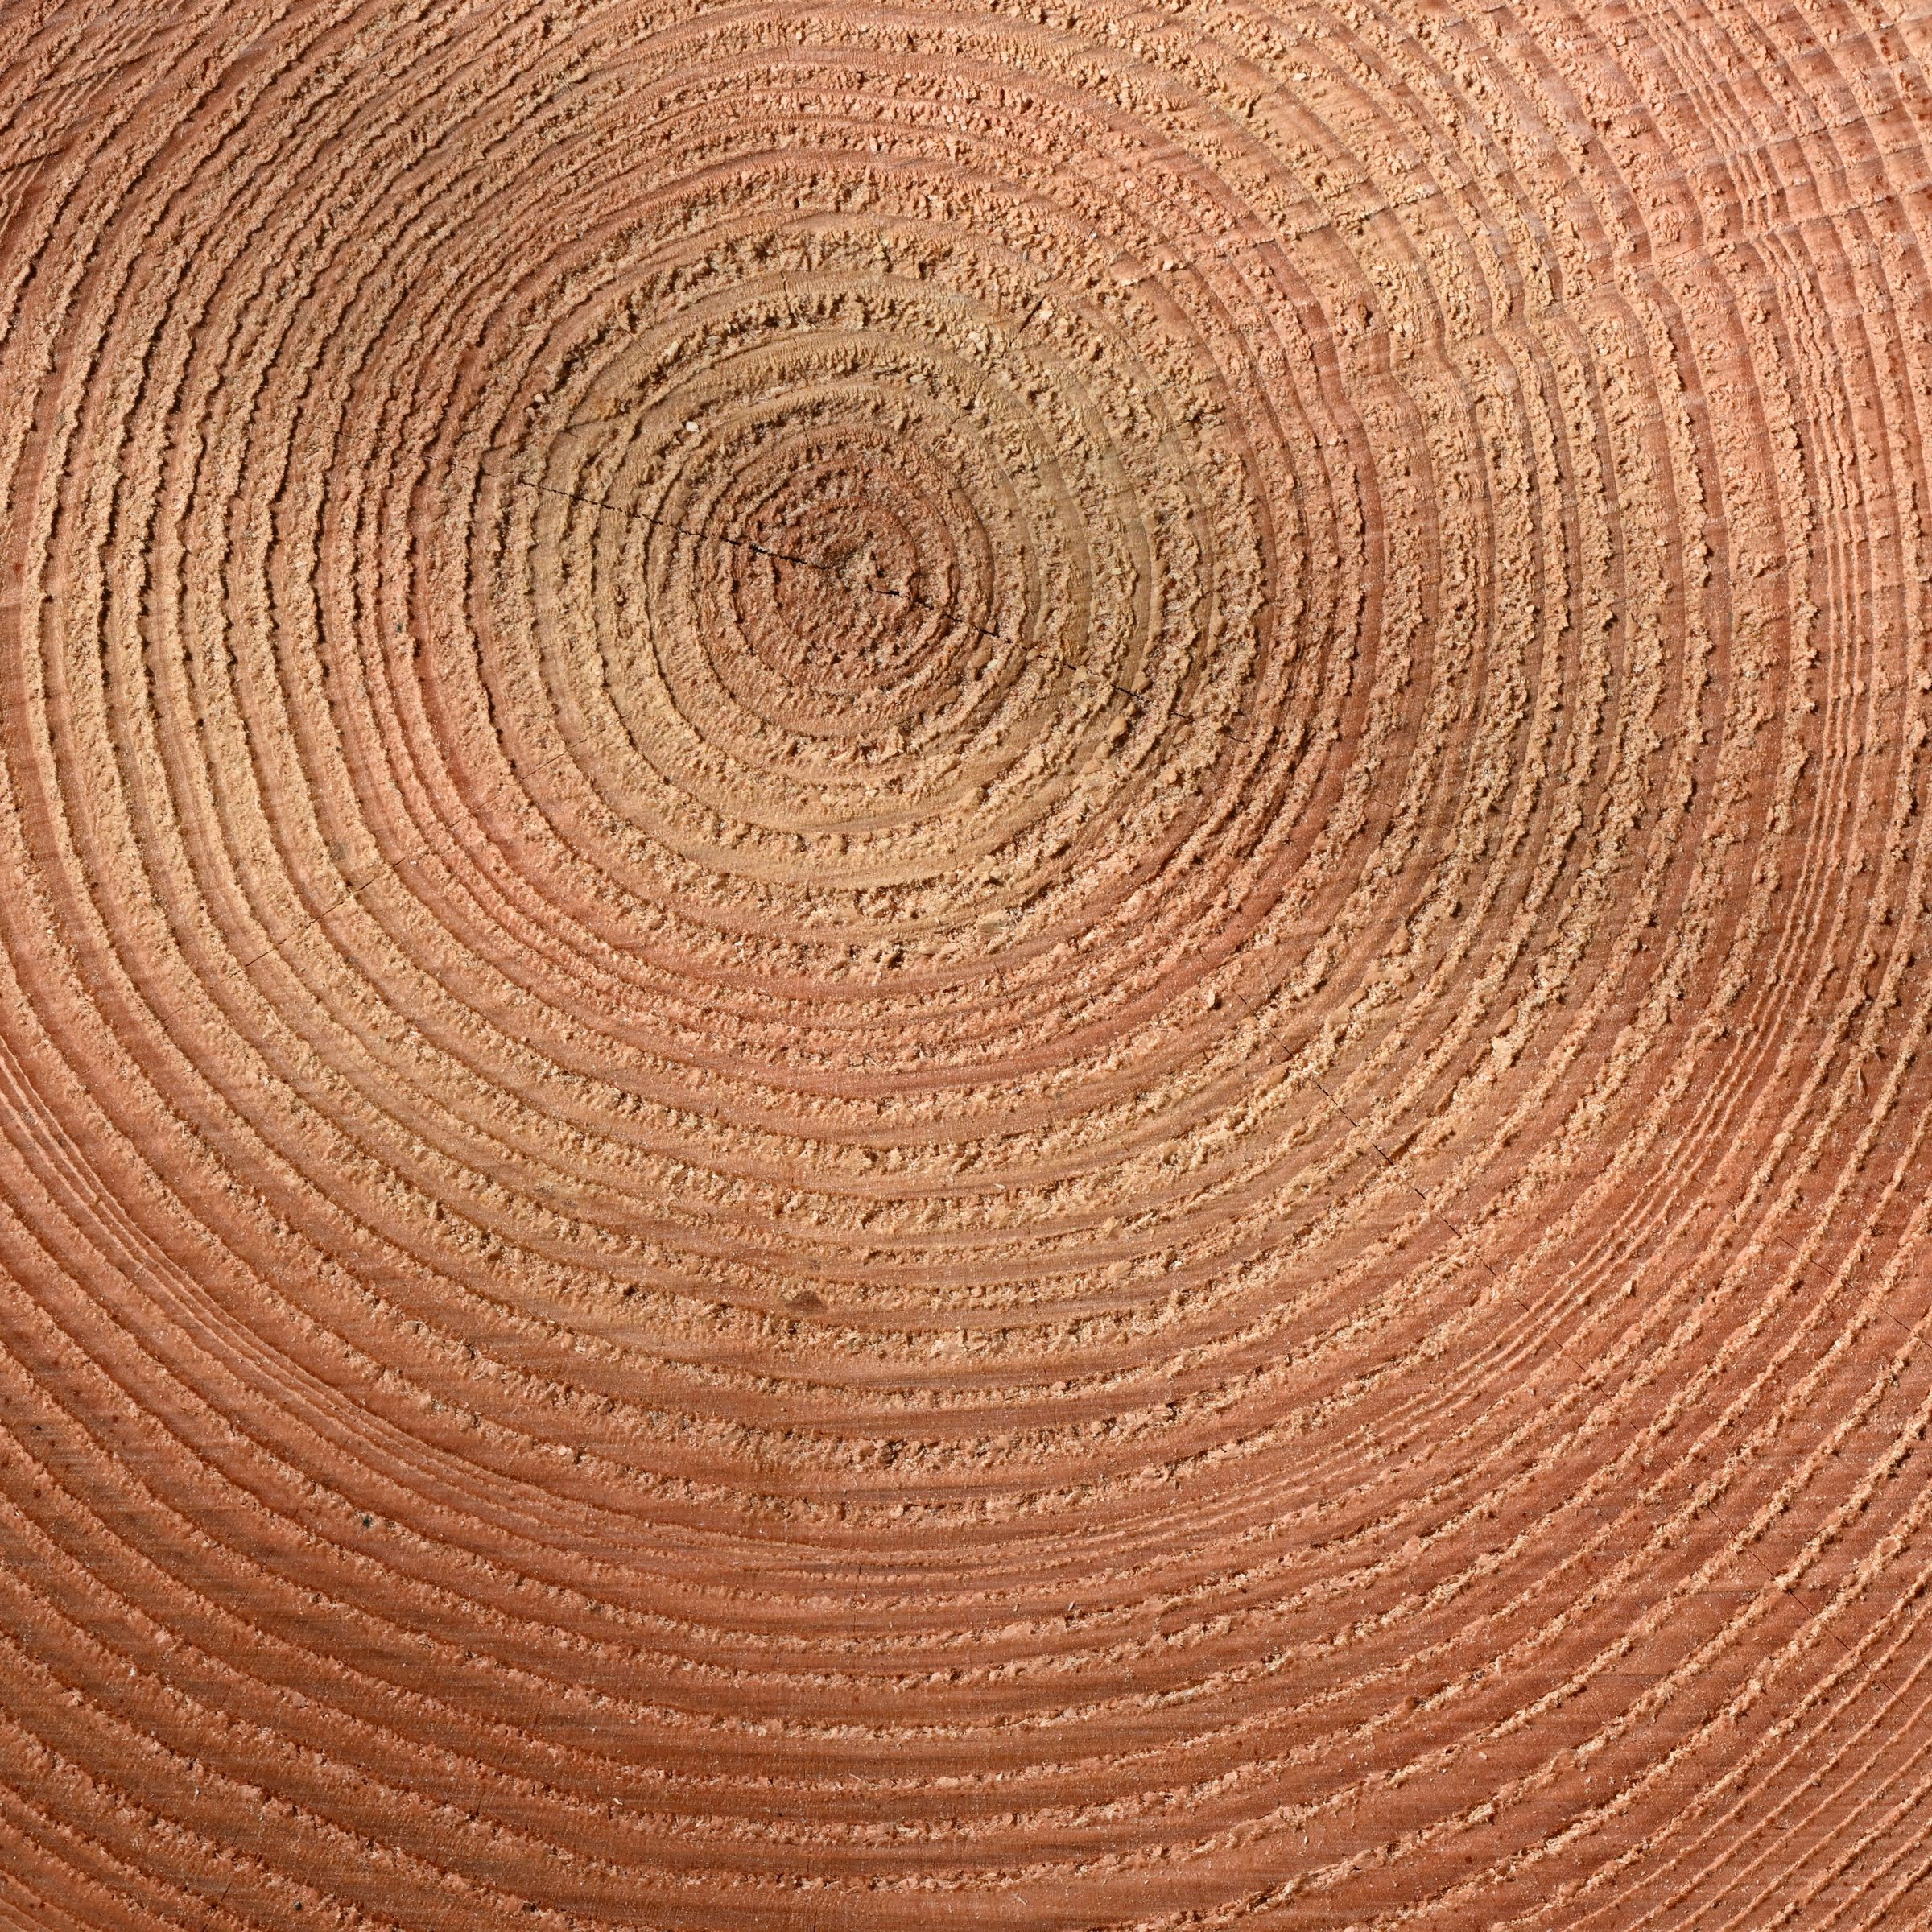 The cross section of a tree trunk shows a pattern of light and dark rings of wood.